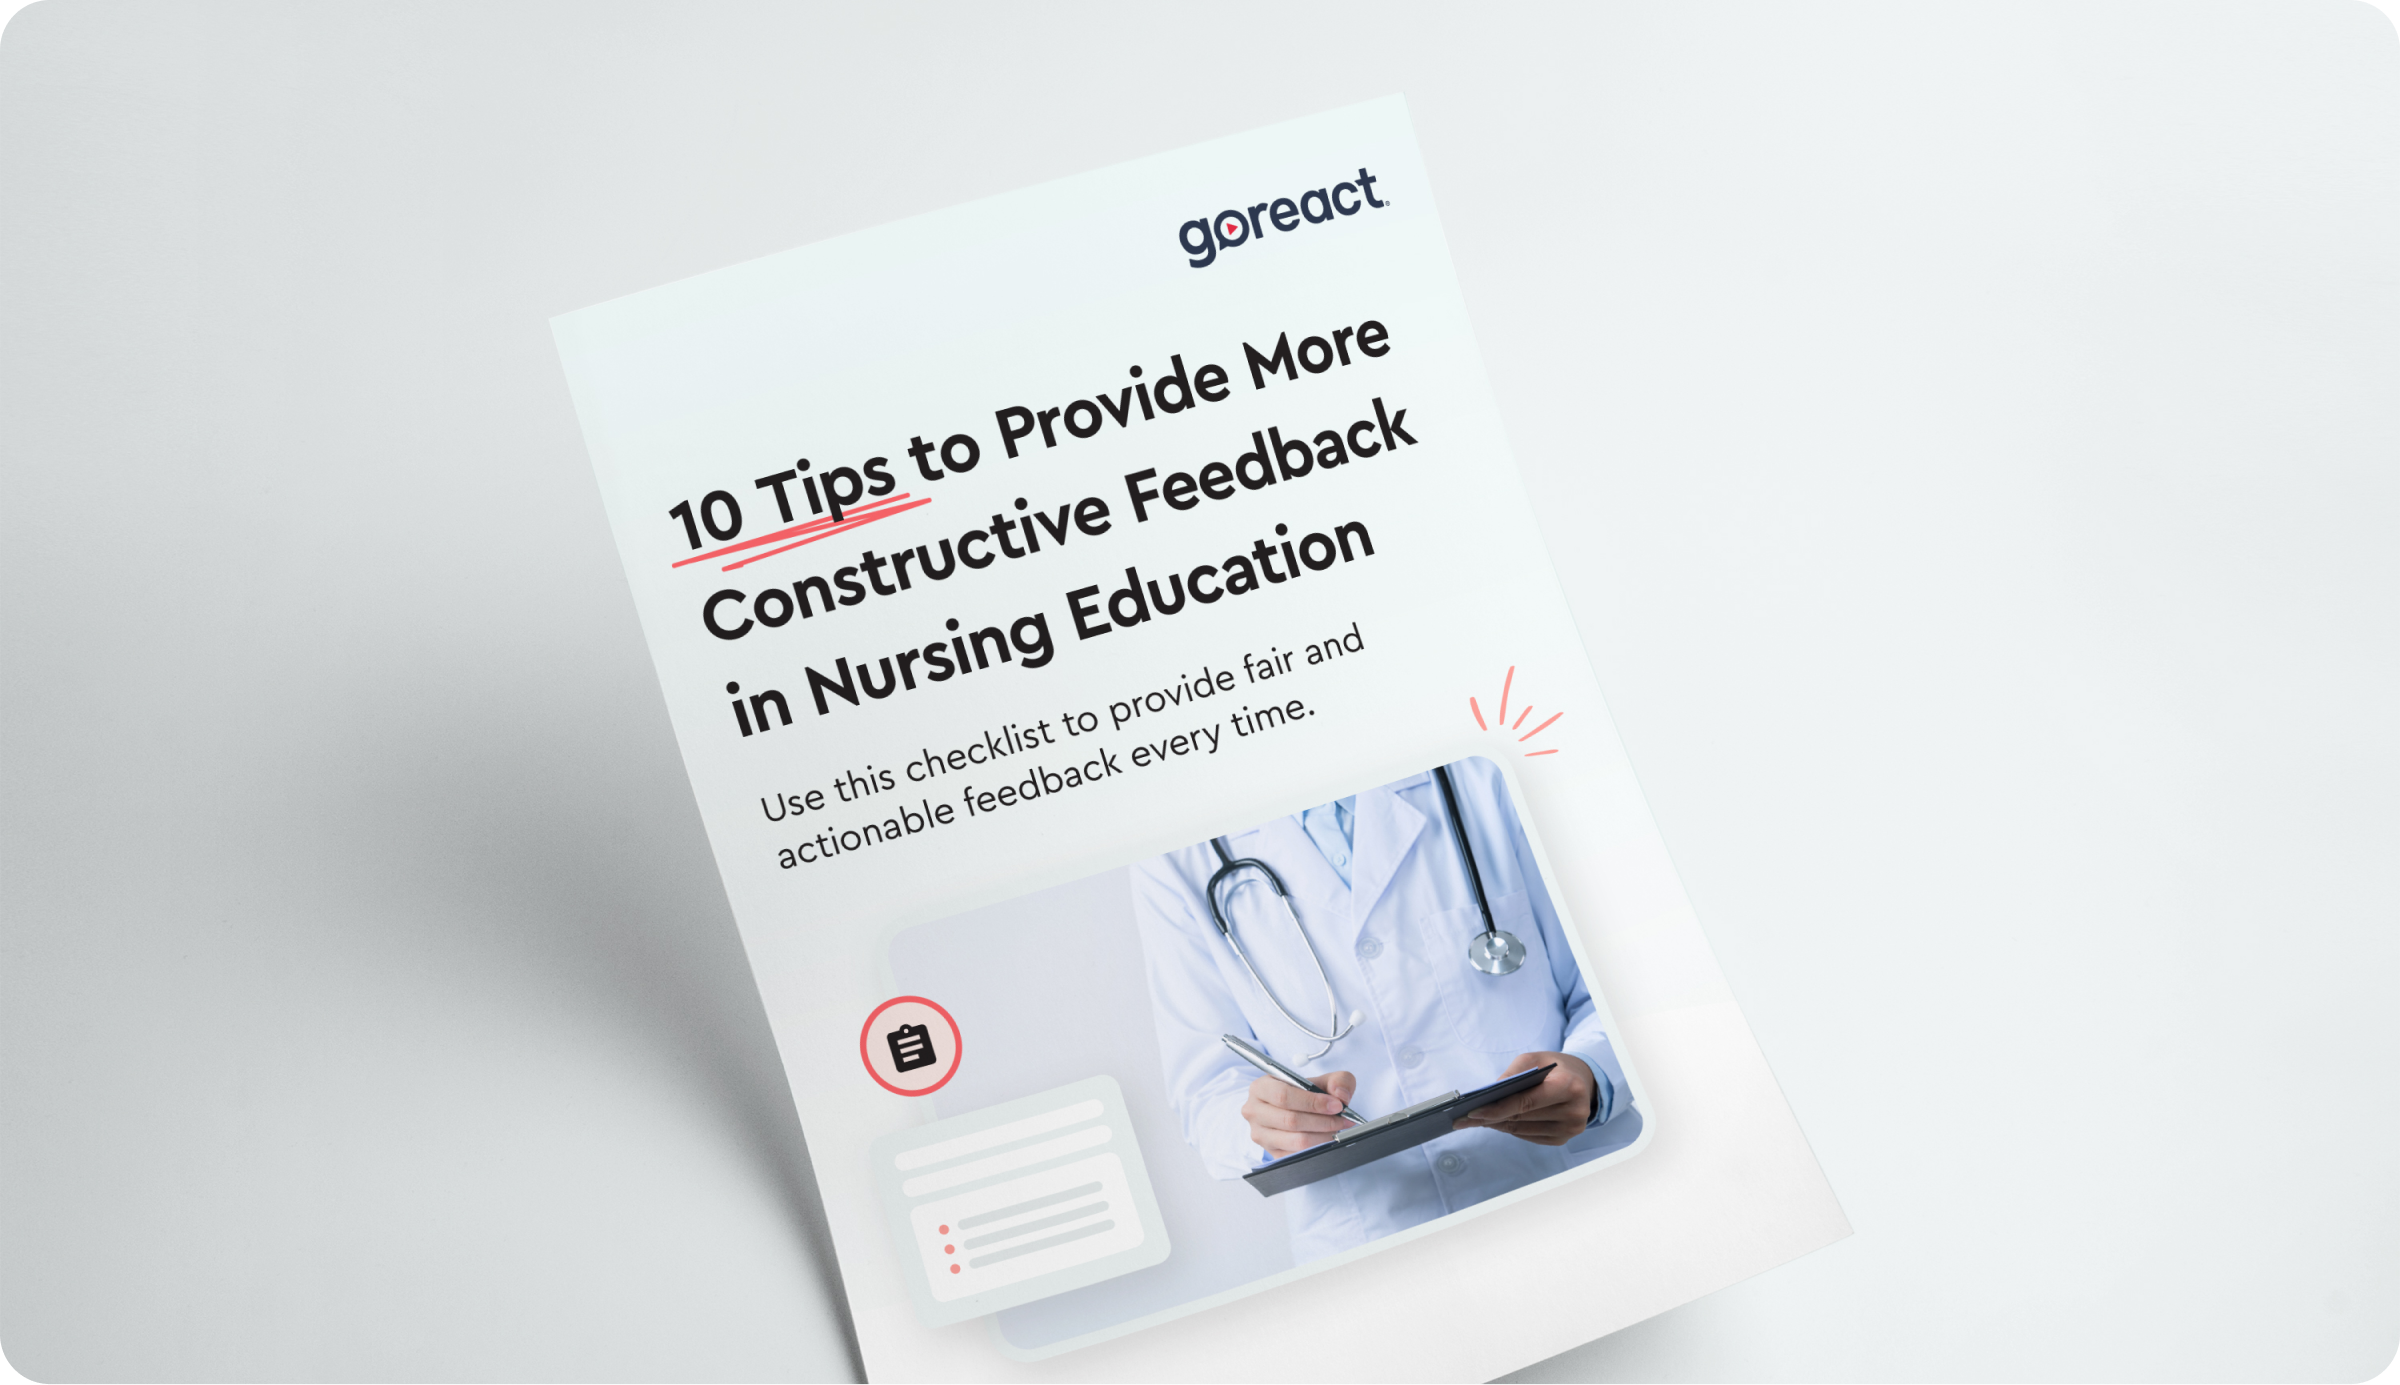 10 Tips to Provide More Constructive Feedback in Nursing Education